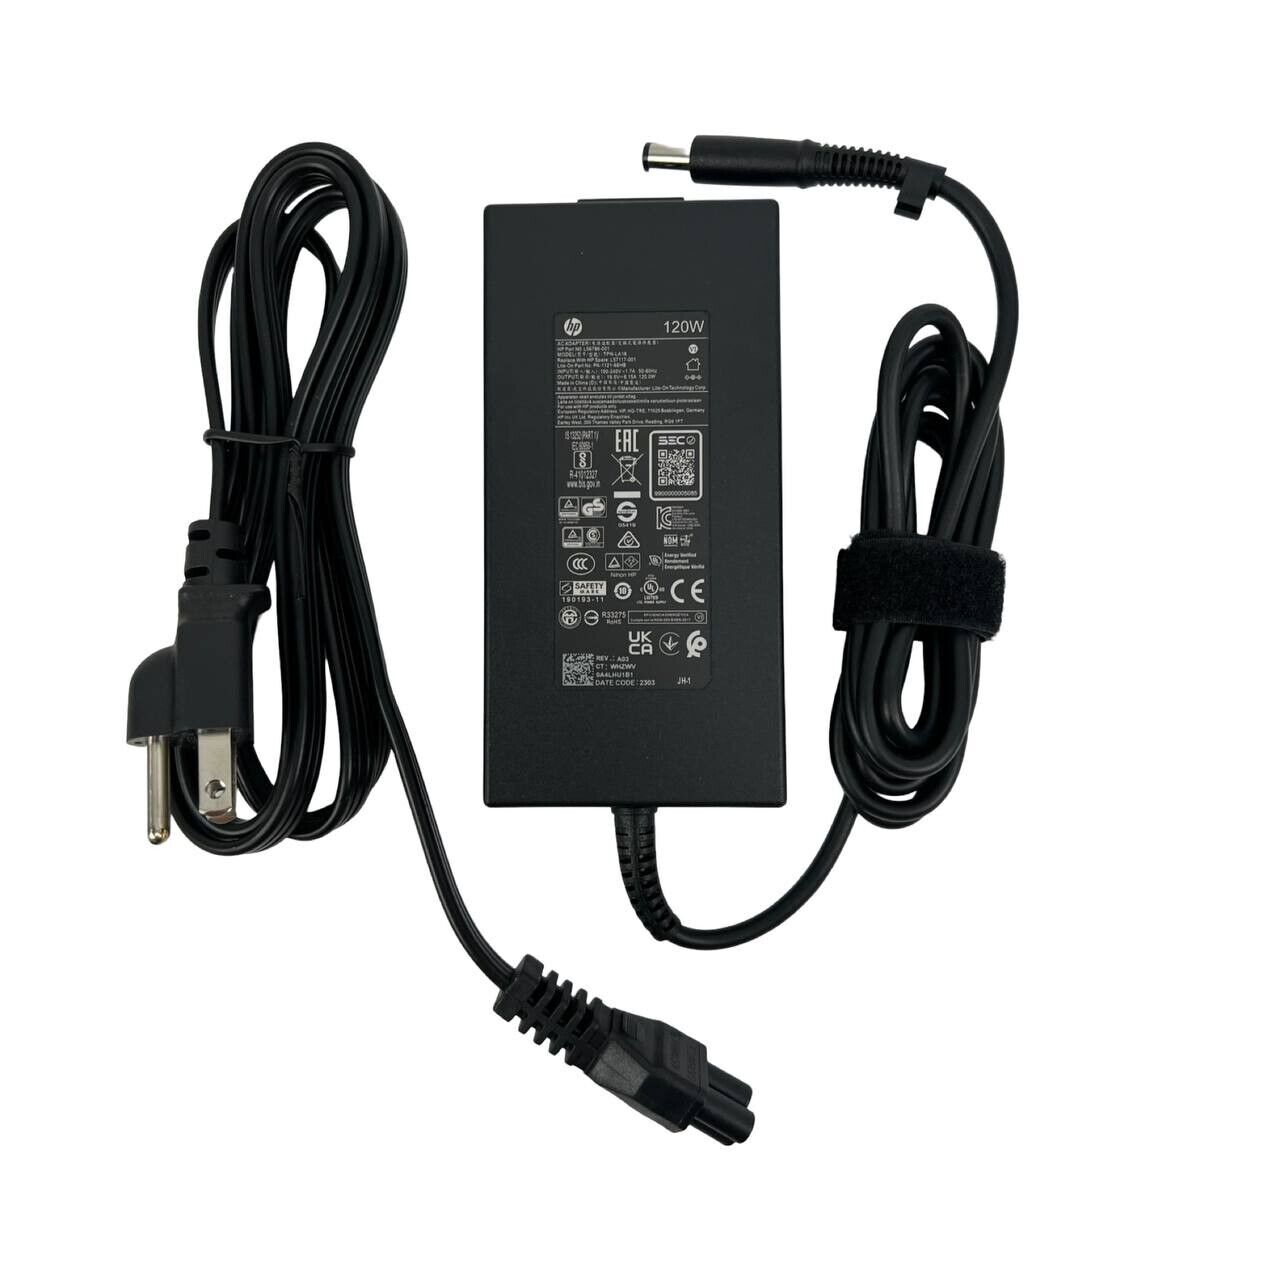 NEW Genuine HP Envy Pavilion 19.5V 6.15A 7mm×5mm 120W AC Adapter Power Supply